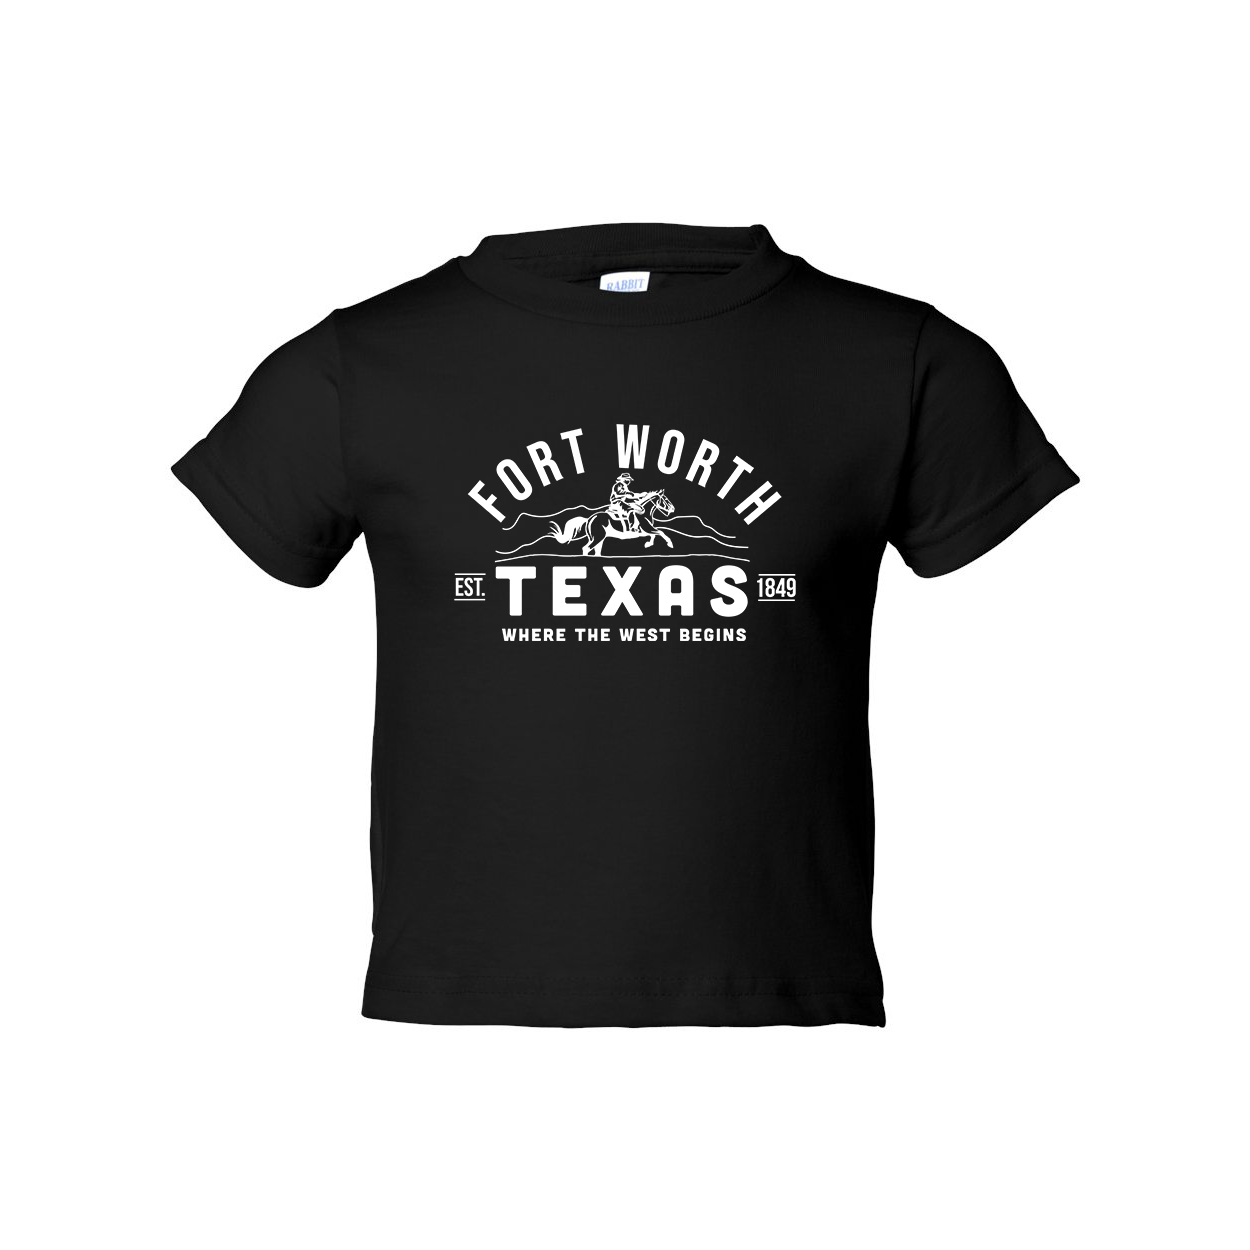 Fort Worth Texas Toddler T-shirt